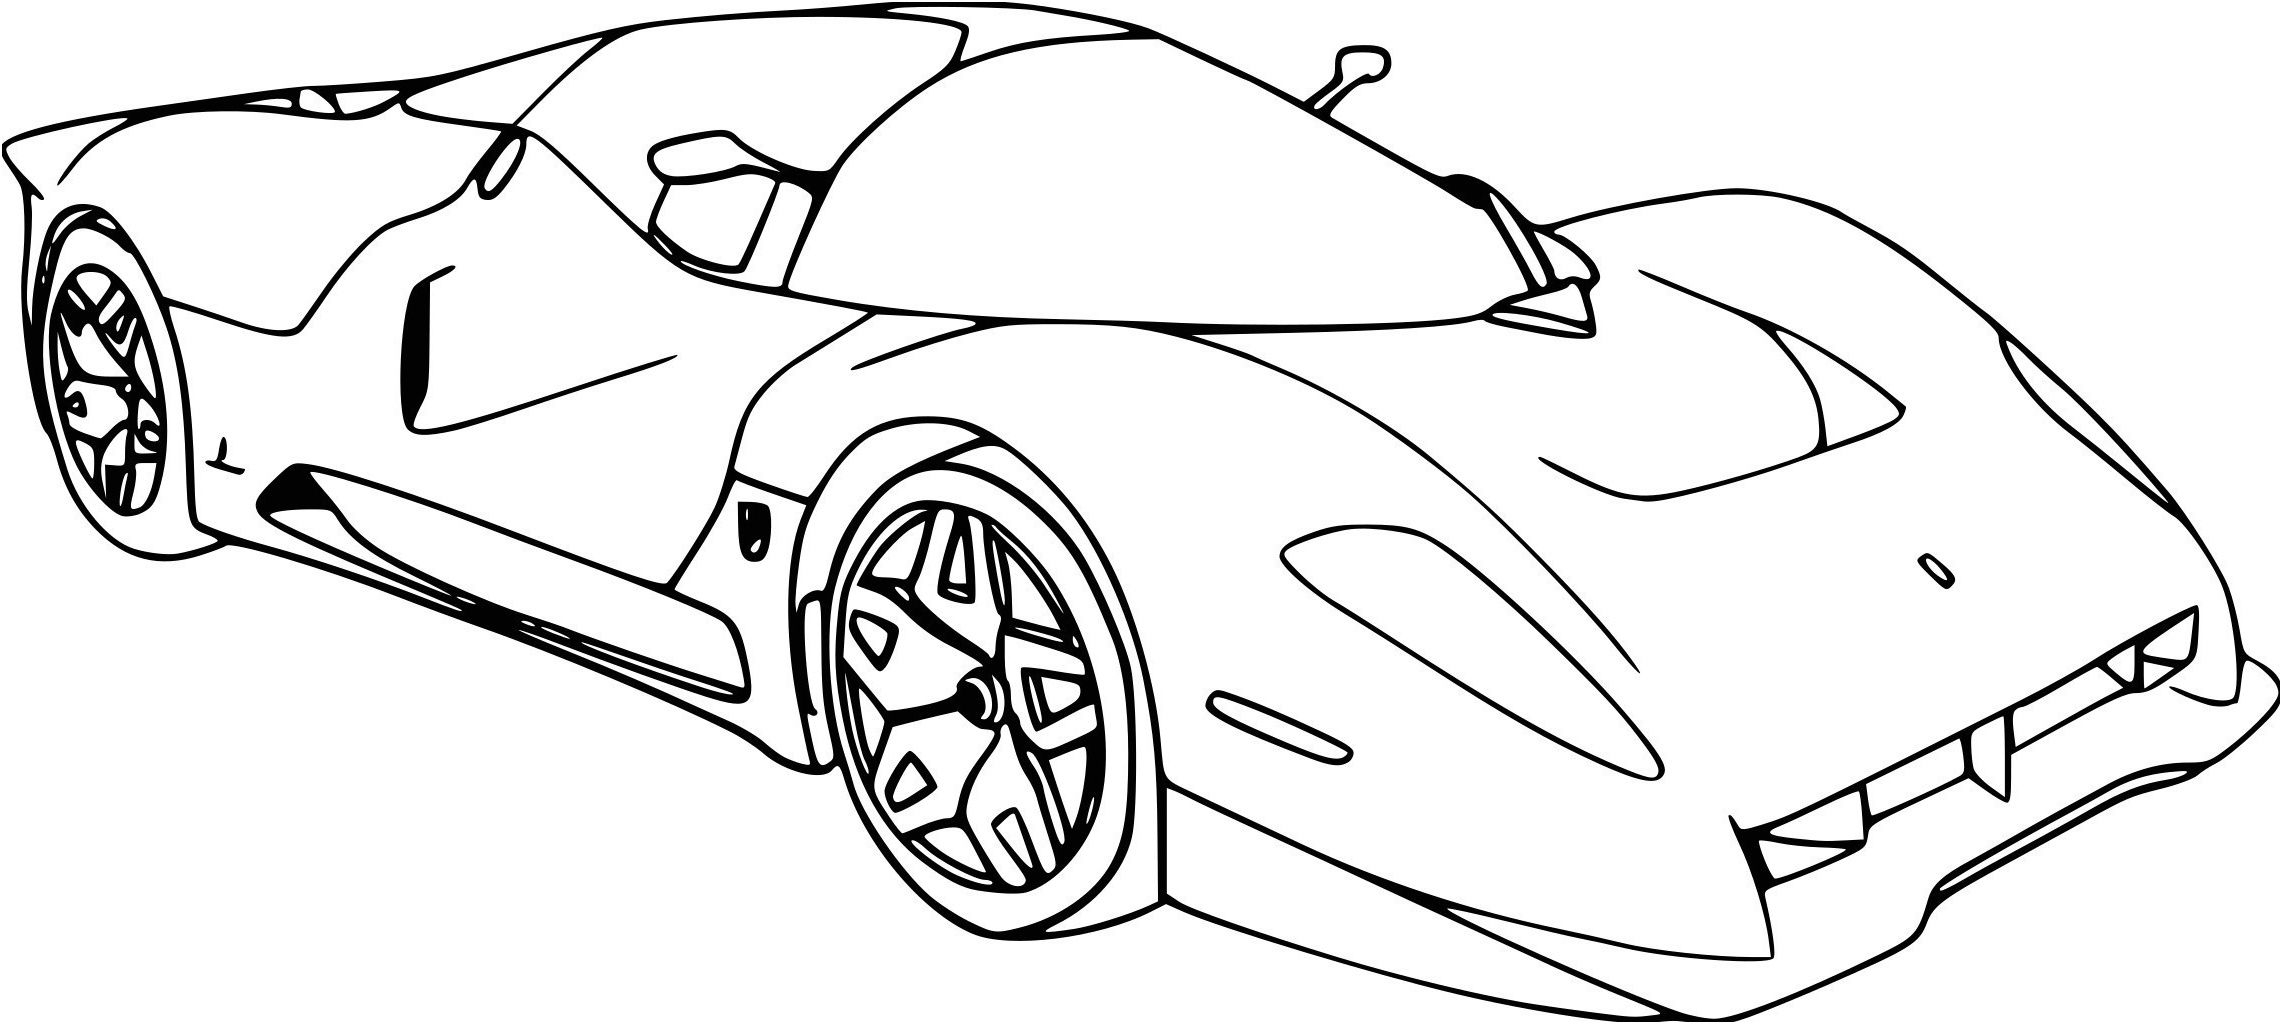 12 Impressionnant Coloriage Voiture Fast And Furious Image  Coloriage concernant Dessins Voitures À Imprimer 